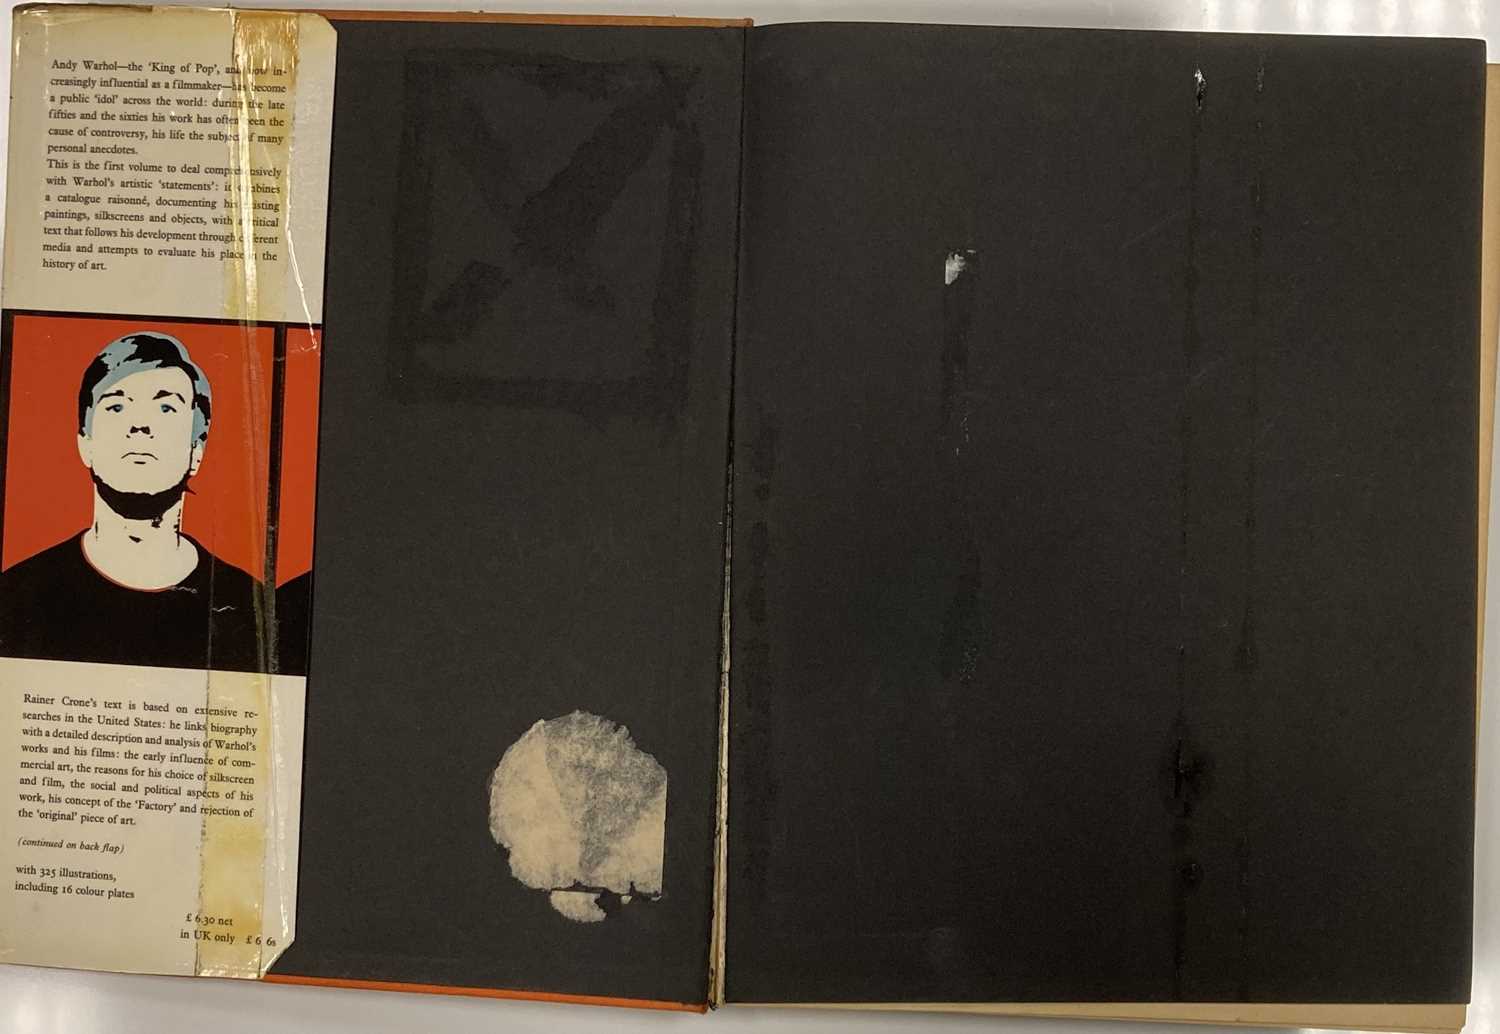 ANDY WARHOL - CATALOGUE RAISONNE AND SOTHEBY'S CATALOGUES - Image 3 of 9